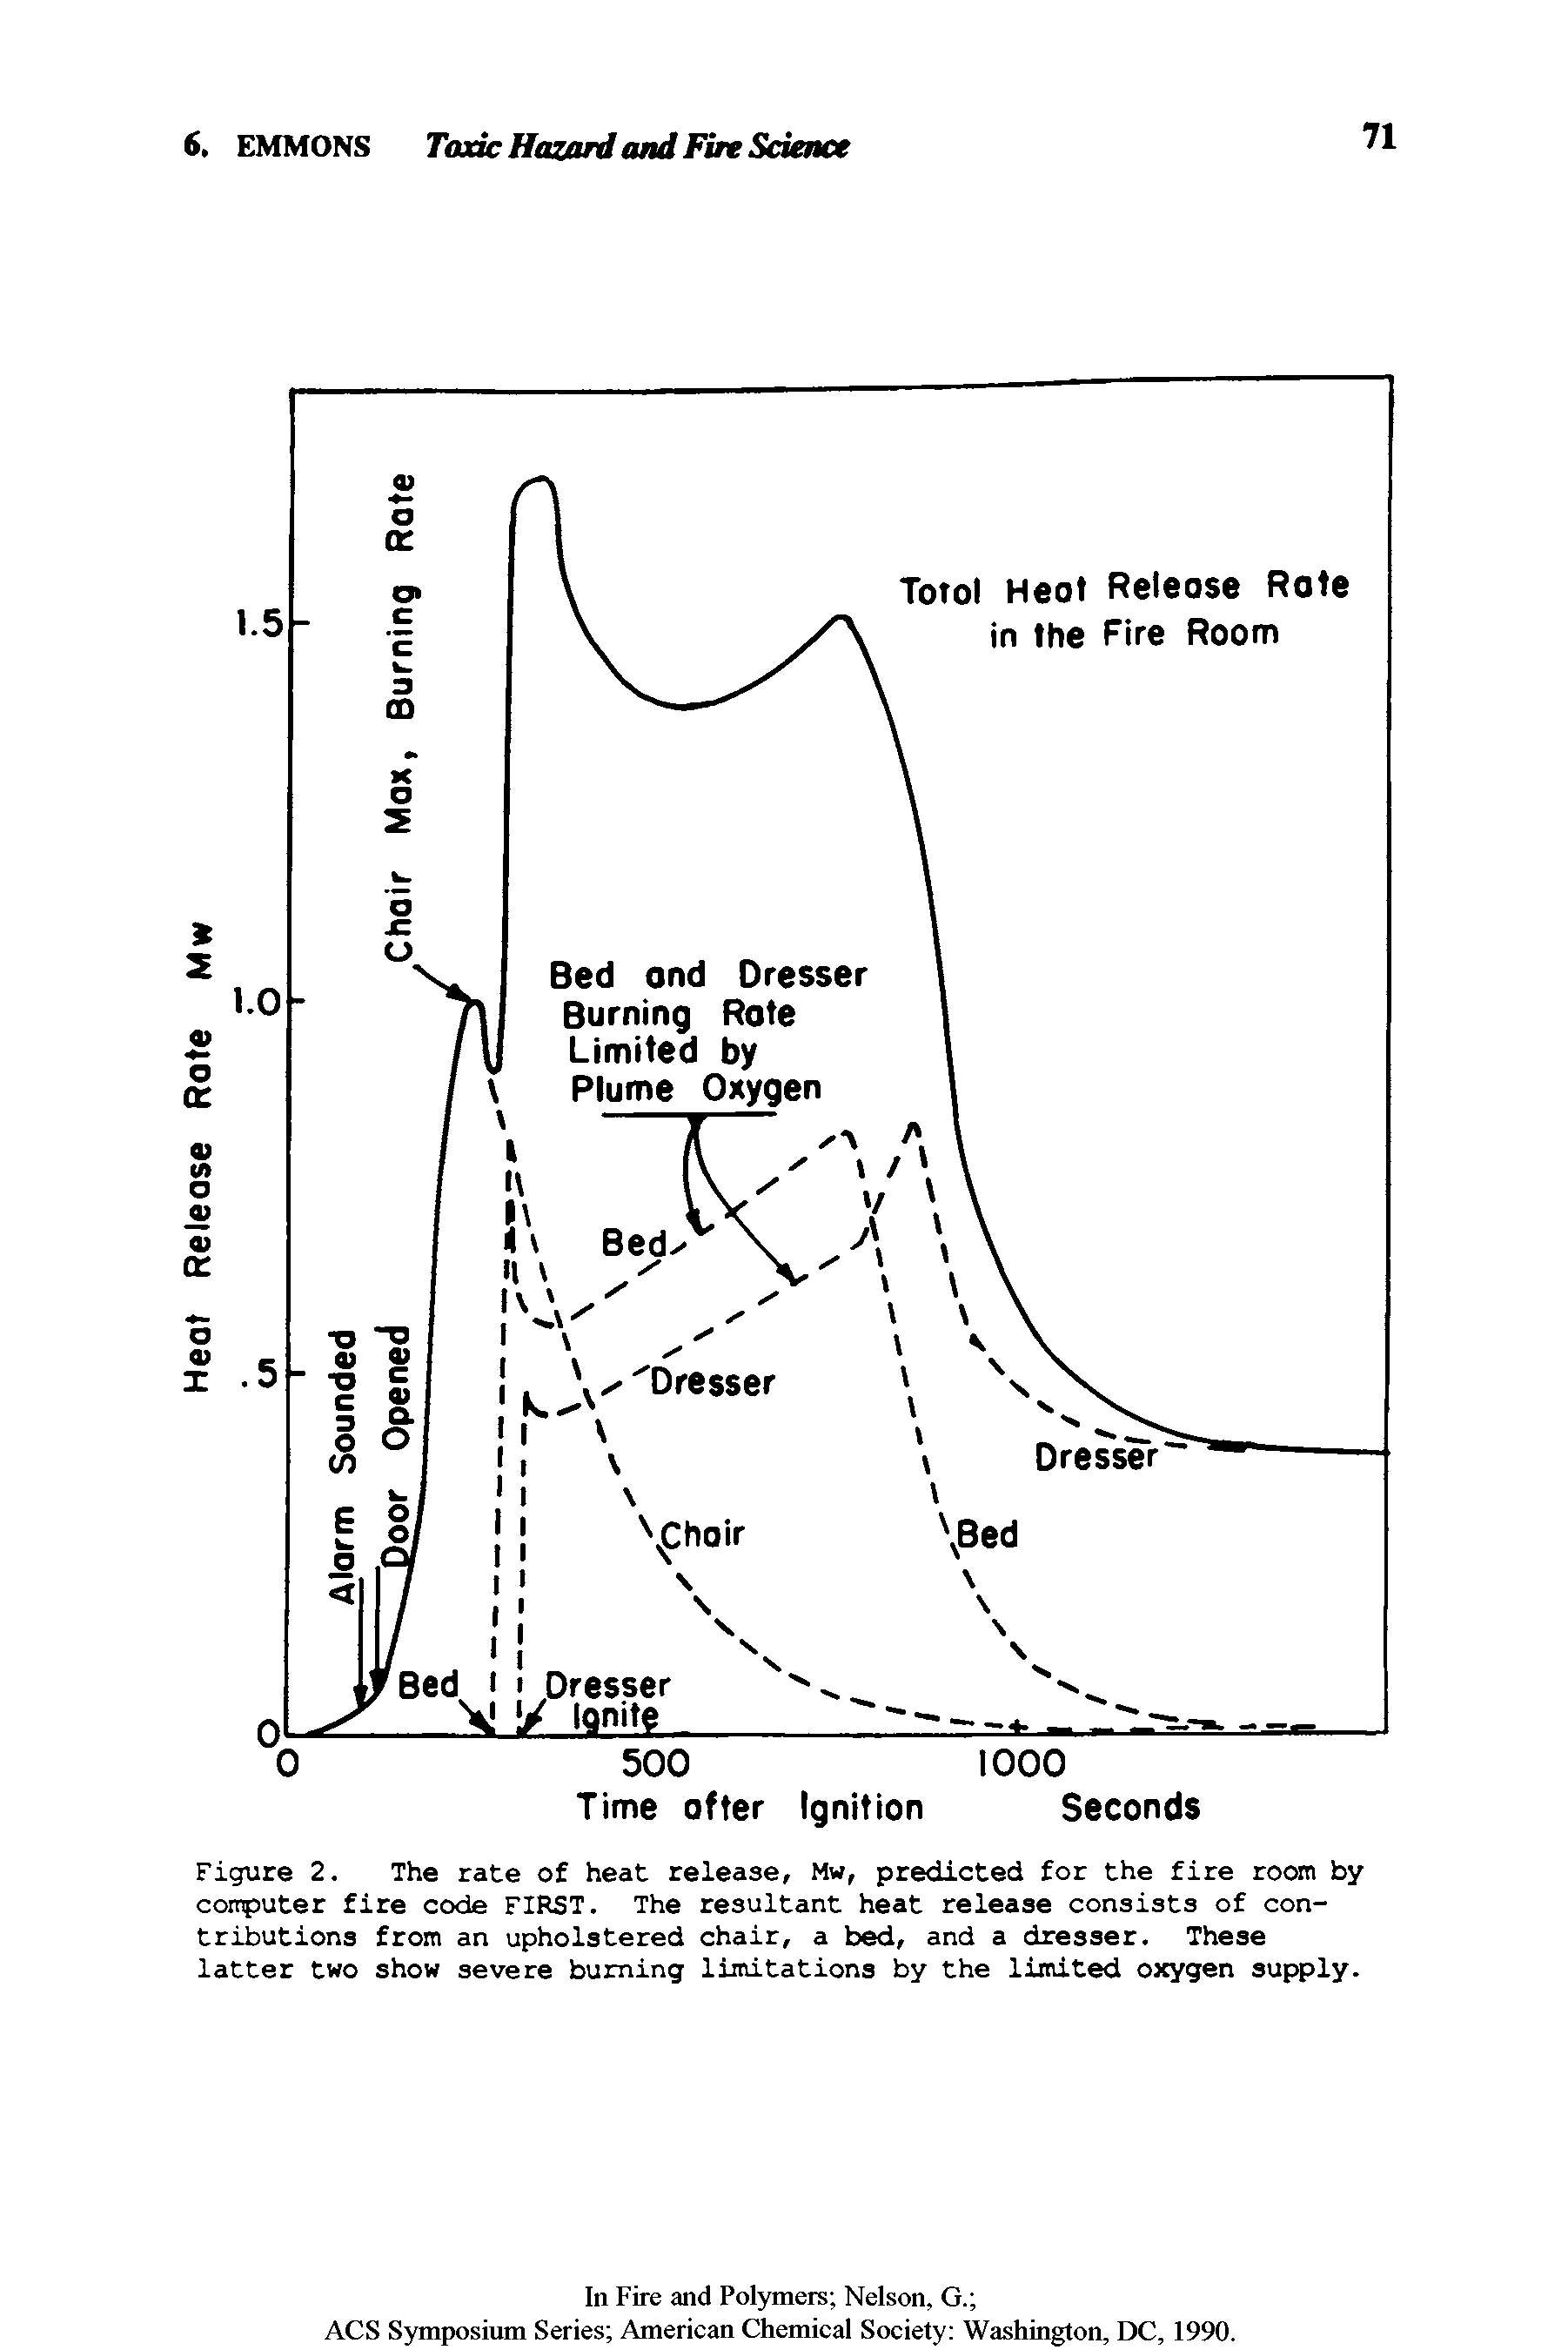 Figure 2. The rate of heat release, Mw, predicted for the fire room by computer fire code FIRST. The resultant heat release consists of contributions from an upholstered chair, a bed, and a dresser. These latter two show severe burning limitations by the limited oxygen supply.